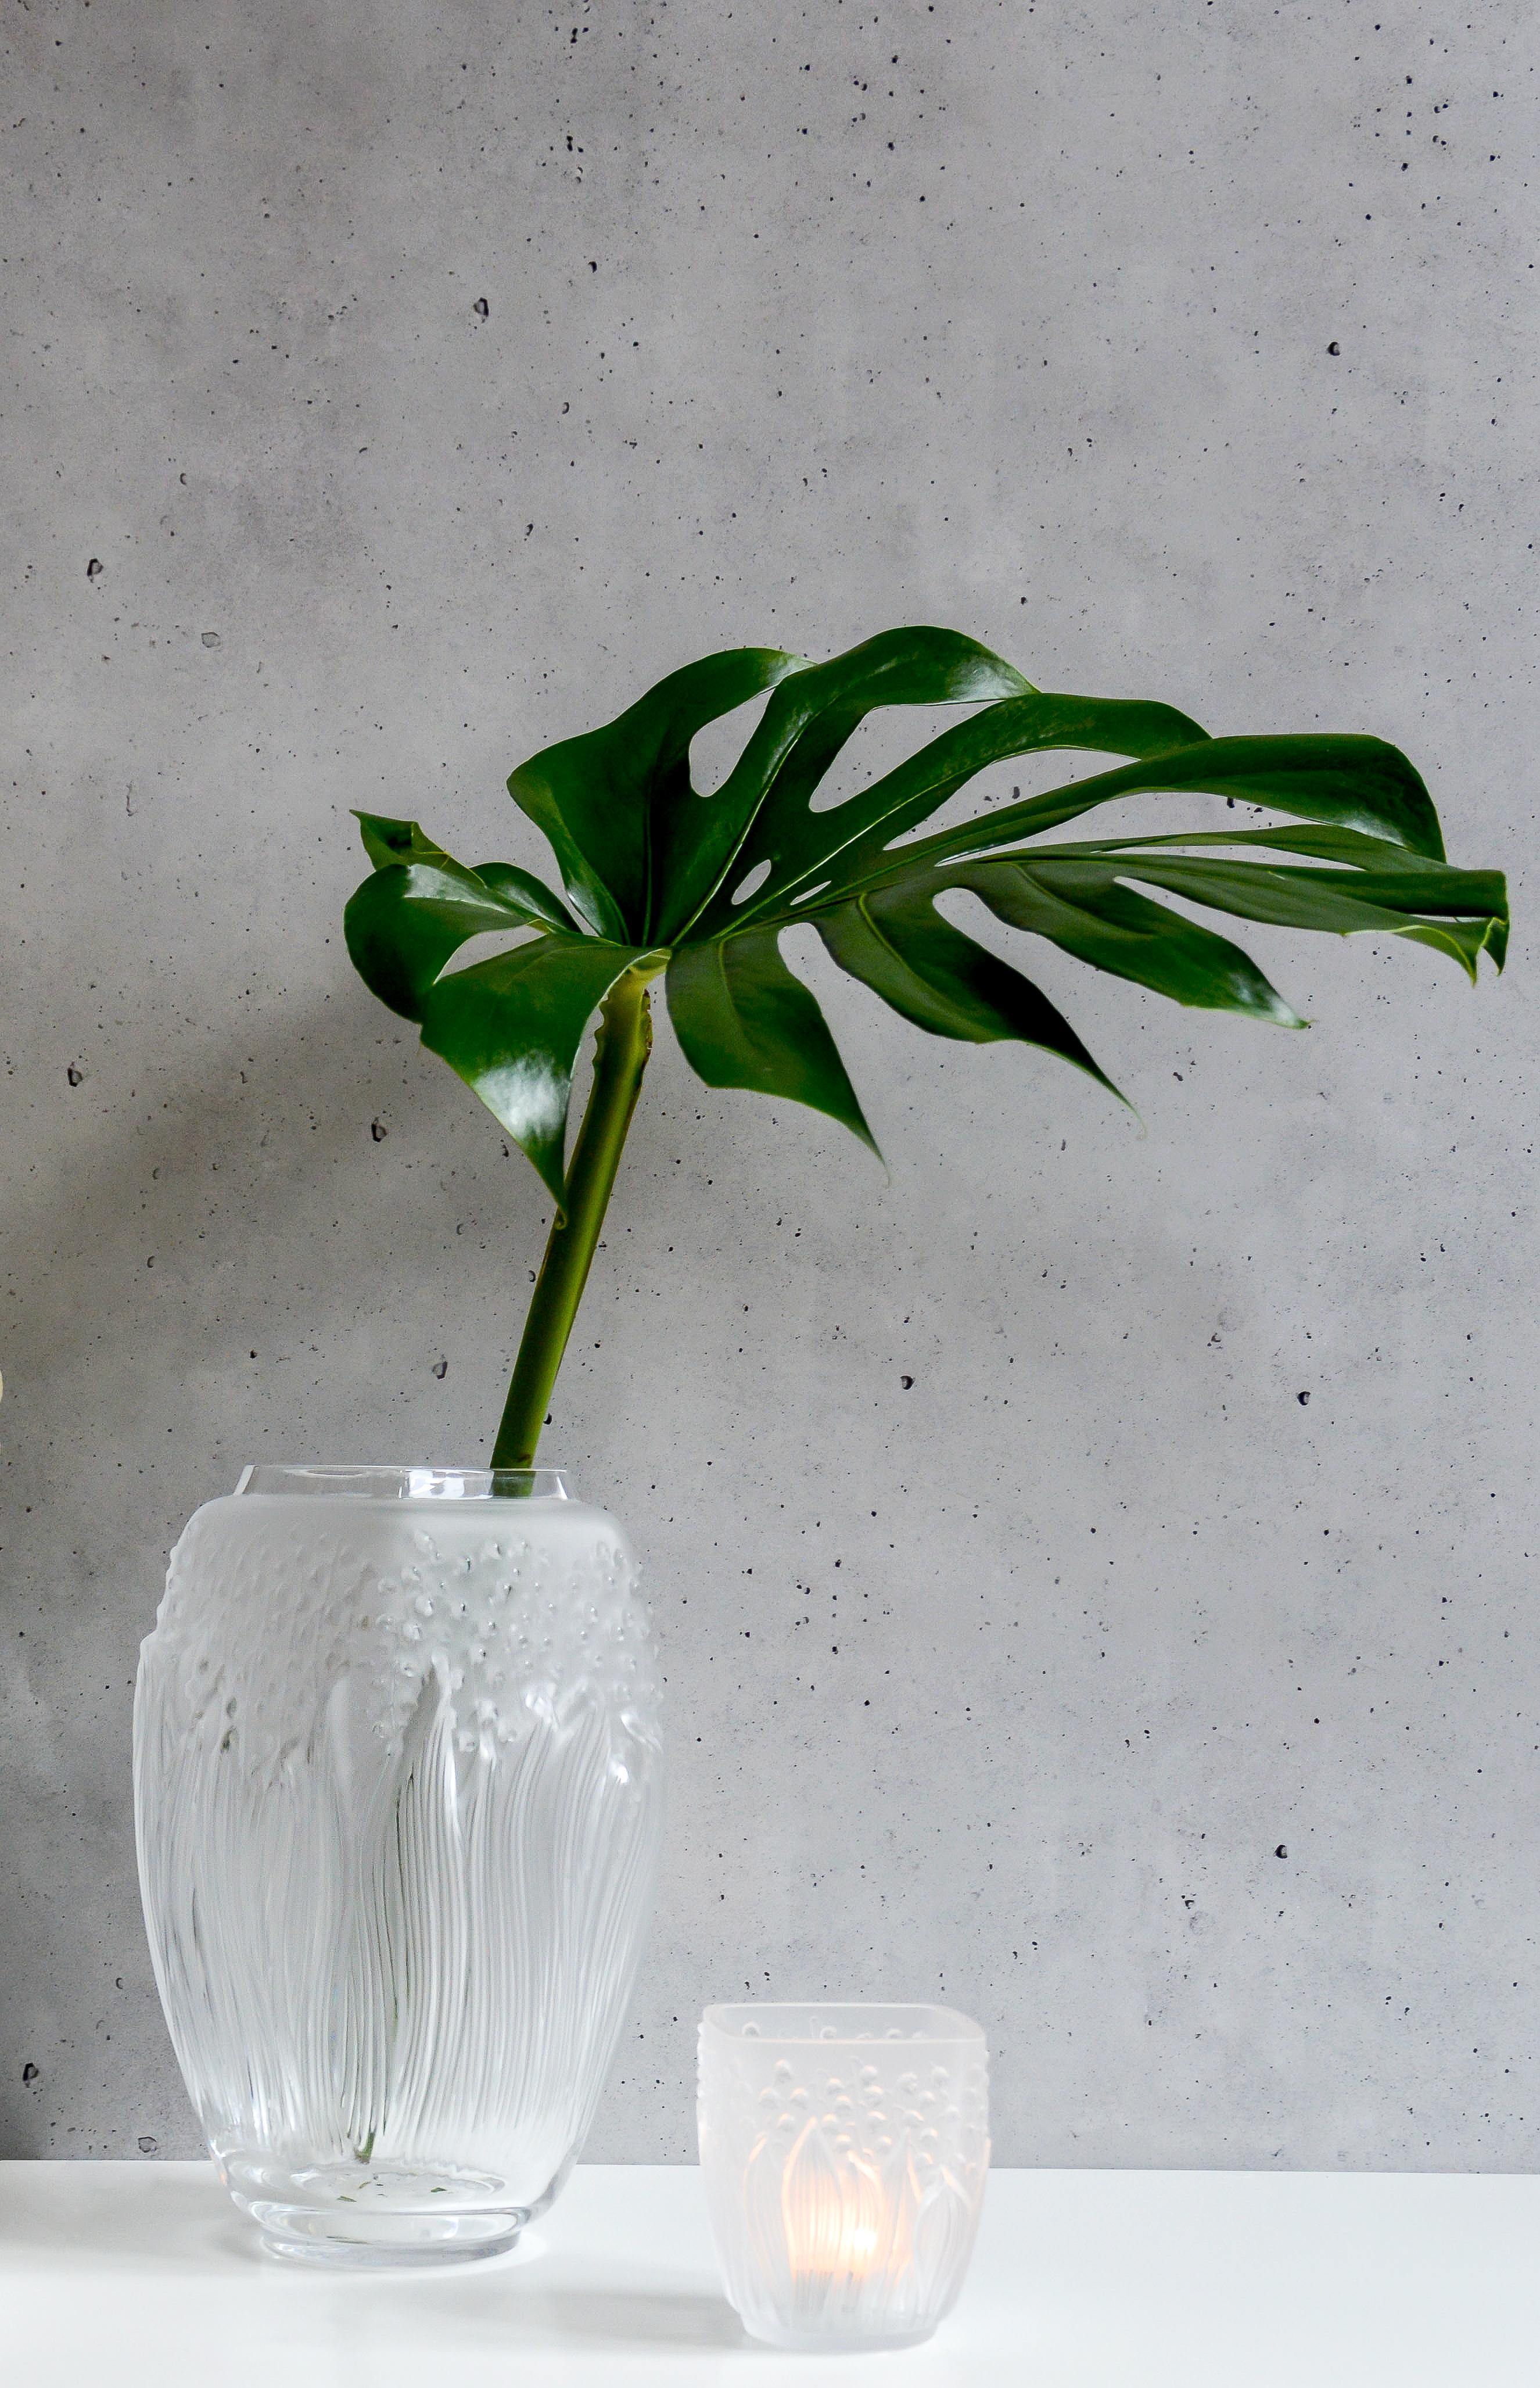 A symbol of good luck and René Lalique’s favorite flower, lily of the valley plays on accumulation on this vase. The light and delicate bells are revealed behind the long undulating leaves, as if rocked by the wind. The square shape contrasts with